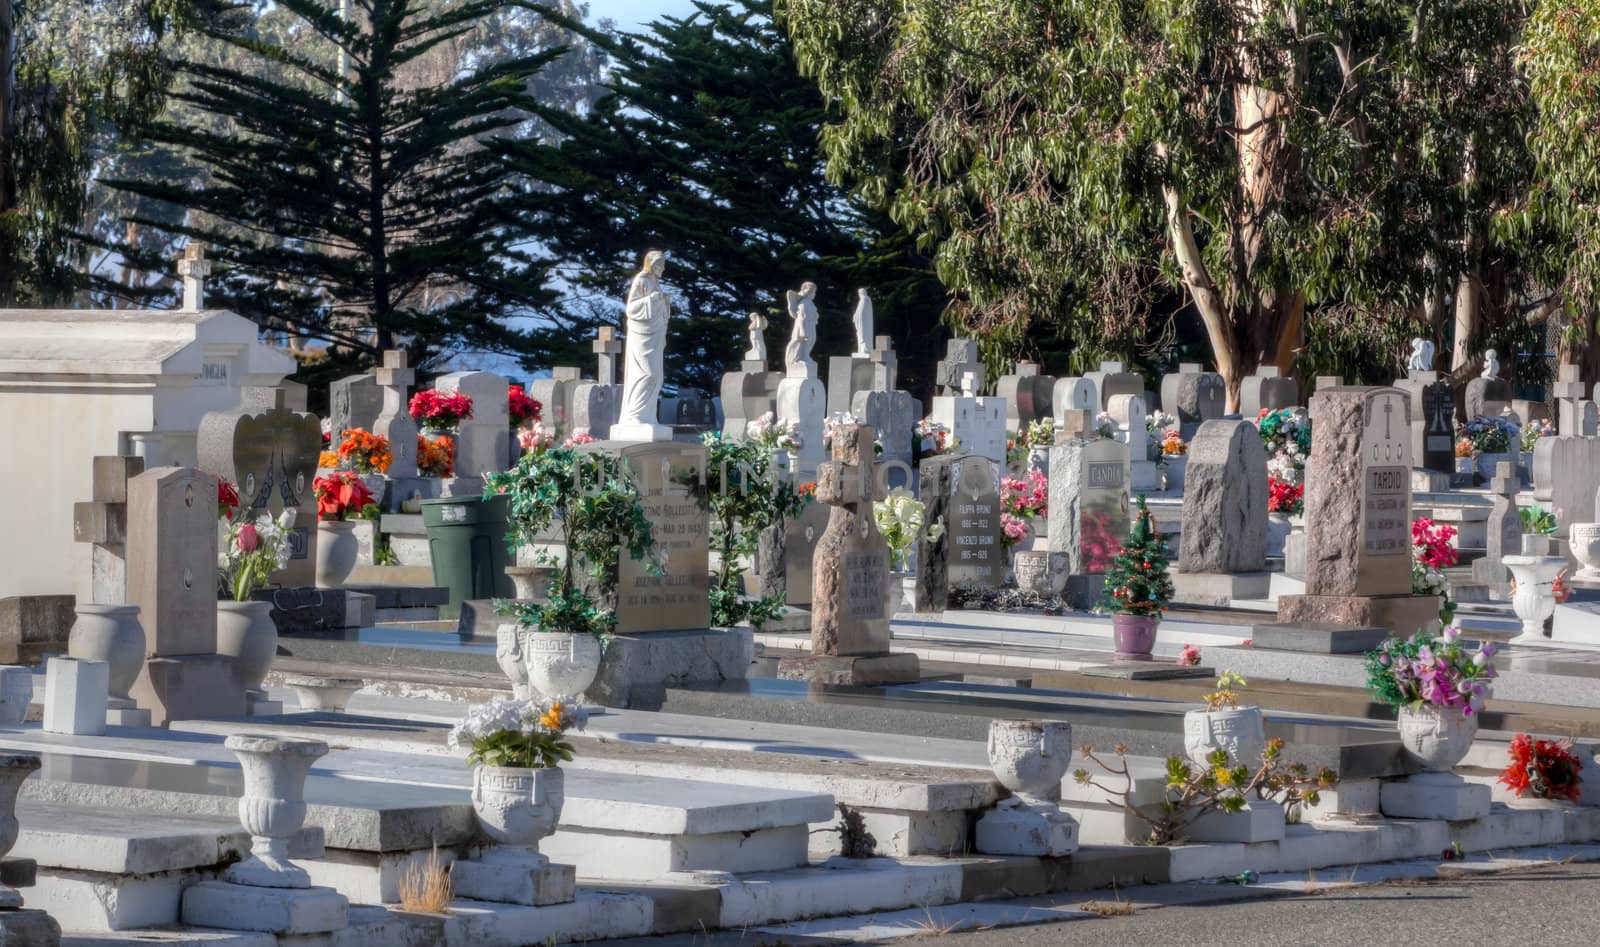 Lines of Grave Markers at San Carlos Cemetery.